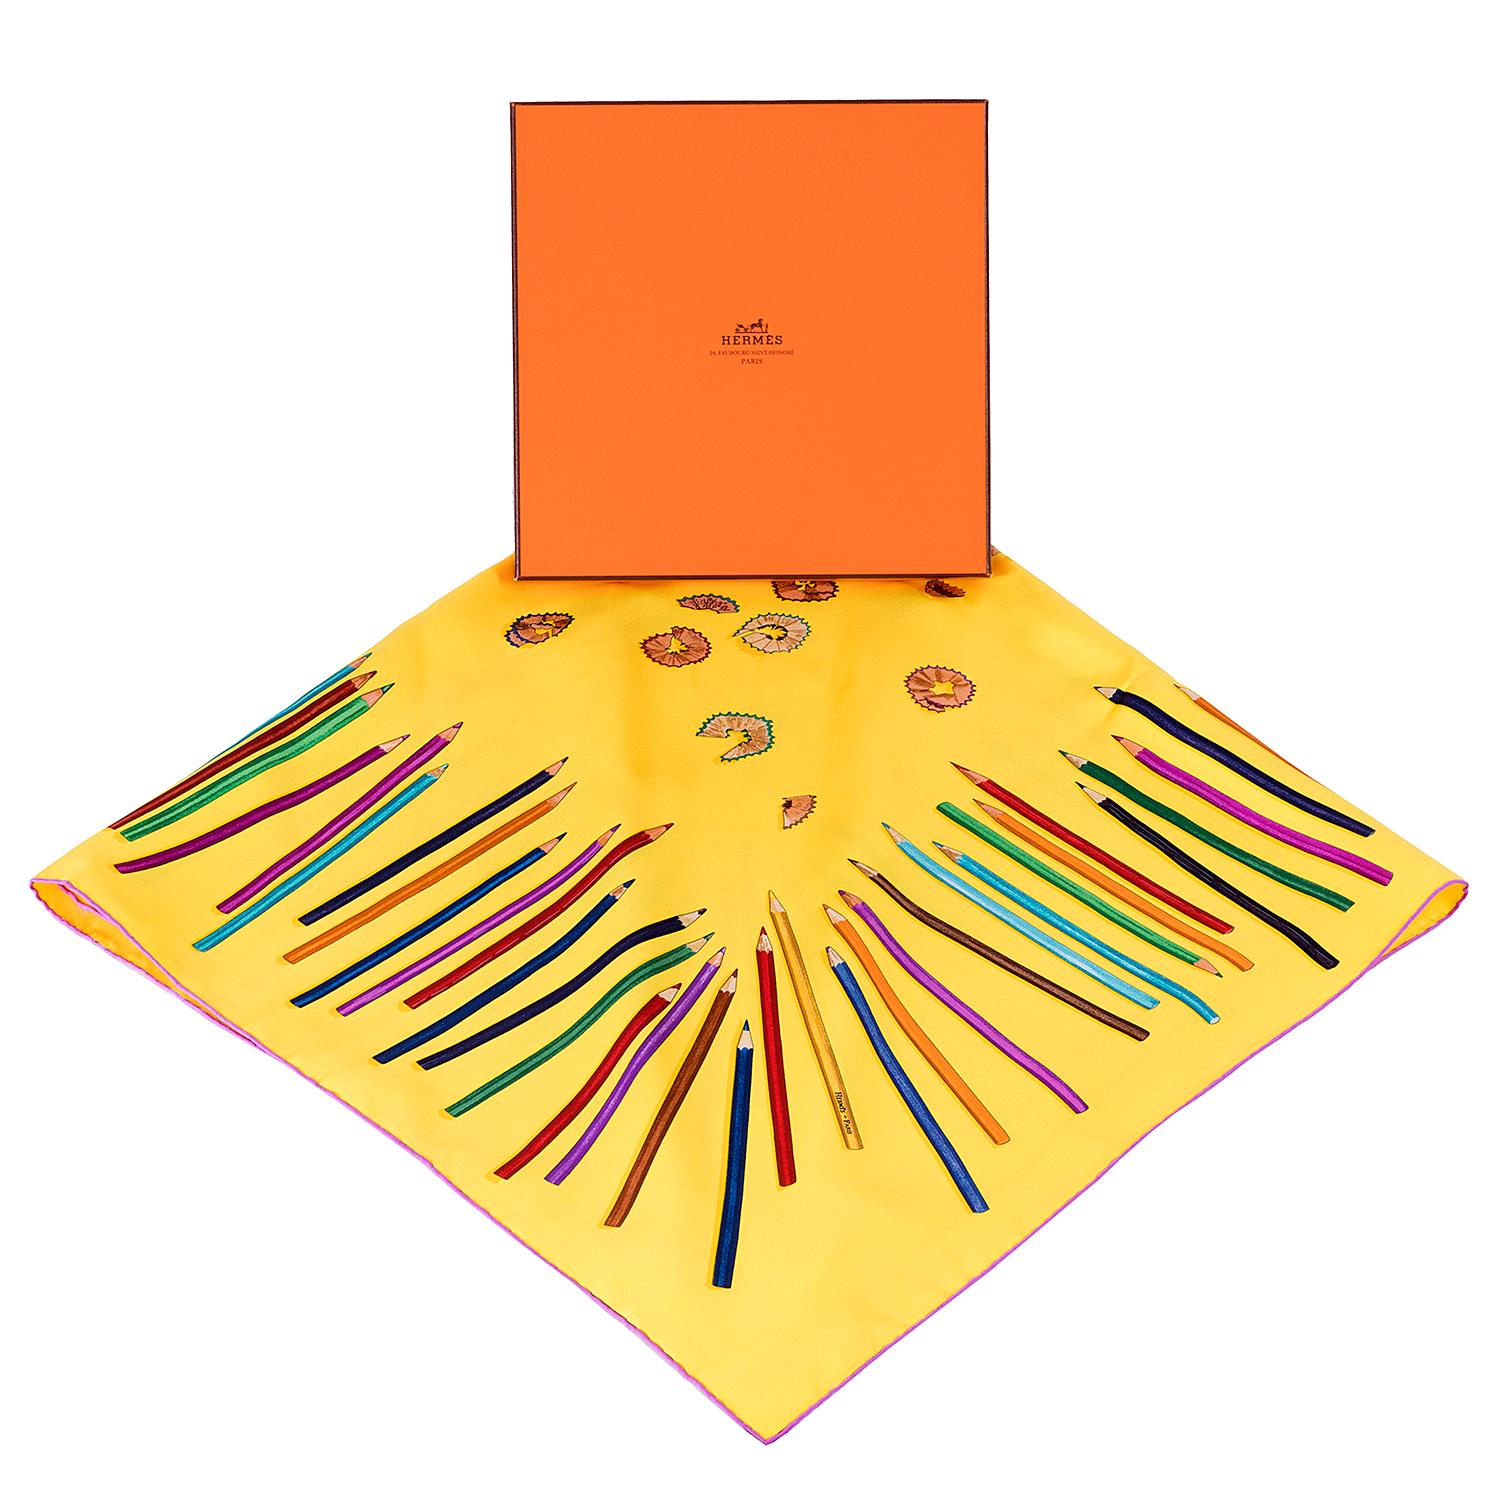 Sumptuous Colours, clever design makes this Hermes Silk Scarf a real stand-out piece. Designed by Leigh P. Cooke in 2004, this rare scarf is in immaculate, 'As New' condition and comes with its original Hermes box.